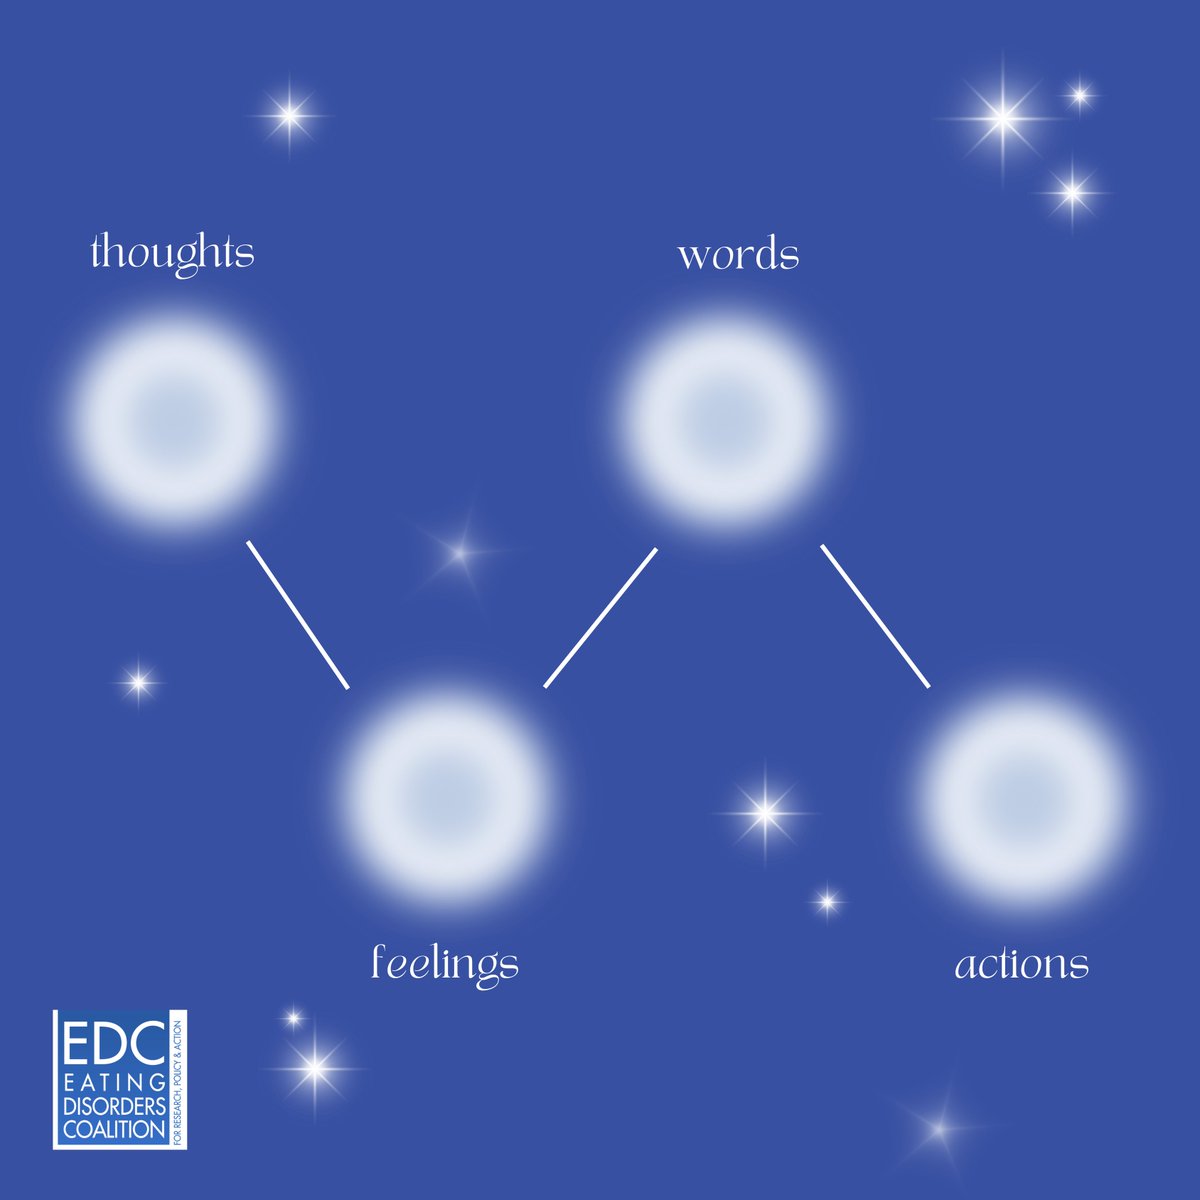 It may not be possible to stop negative thoughts at the source, but by passively observing them and recognizing them as mere thoughts, not truths, we can take advantage of the mind-body connection to positively impact our lives! #EDCTipTuesday